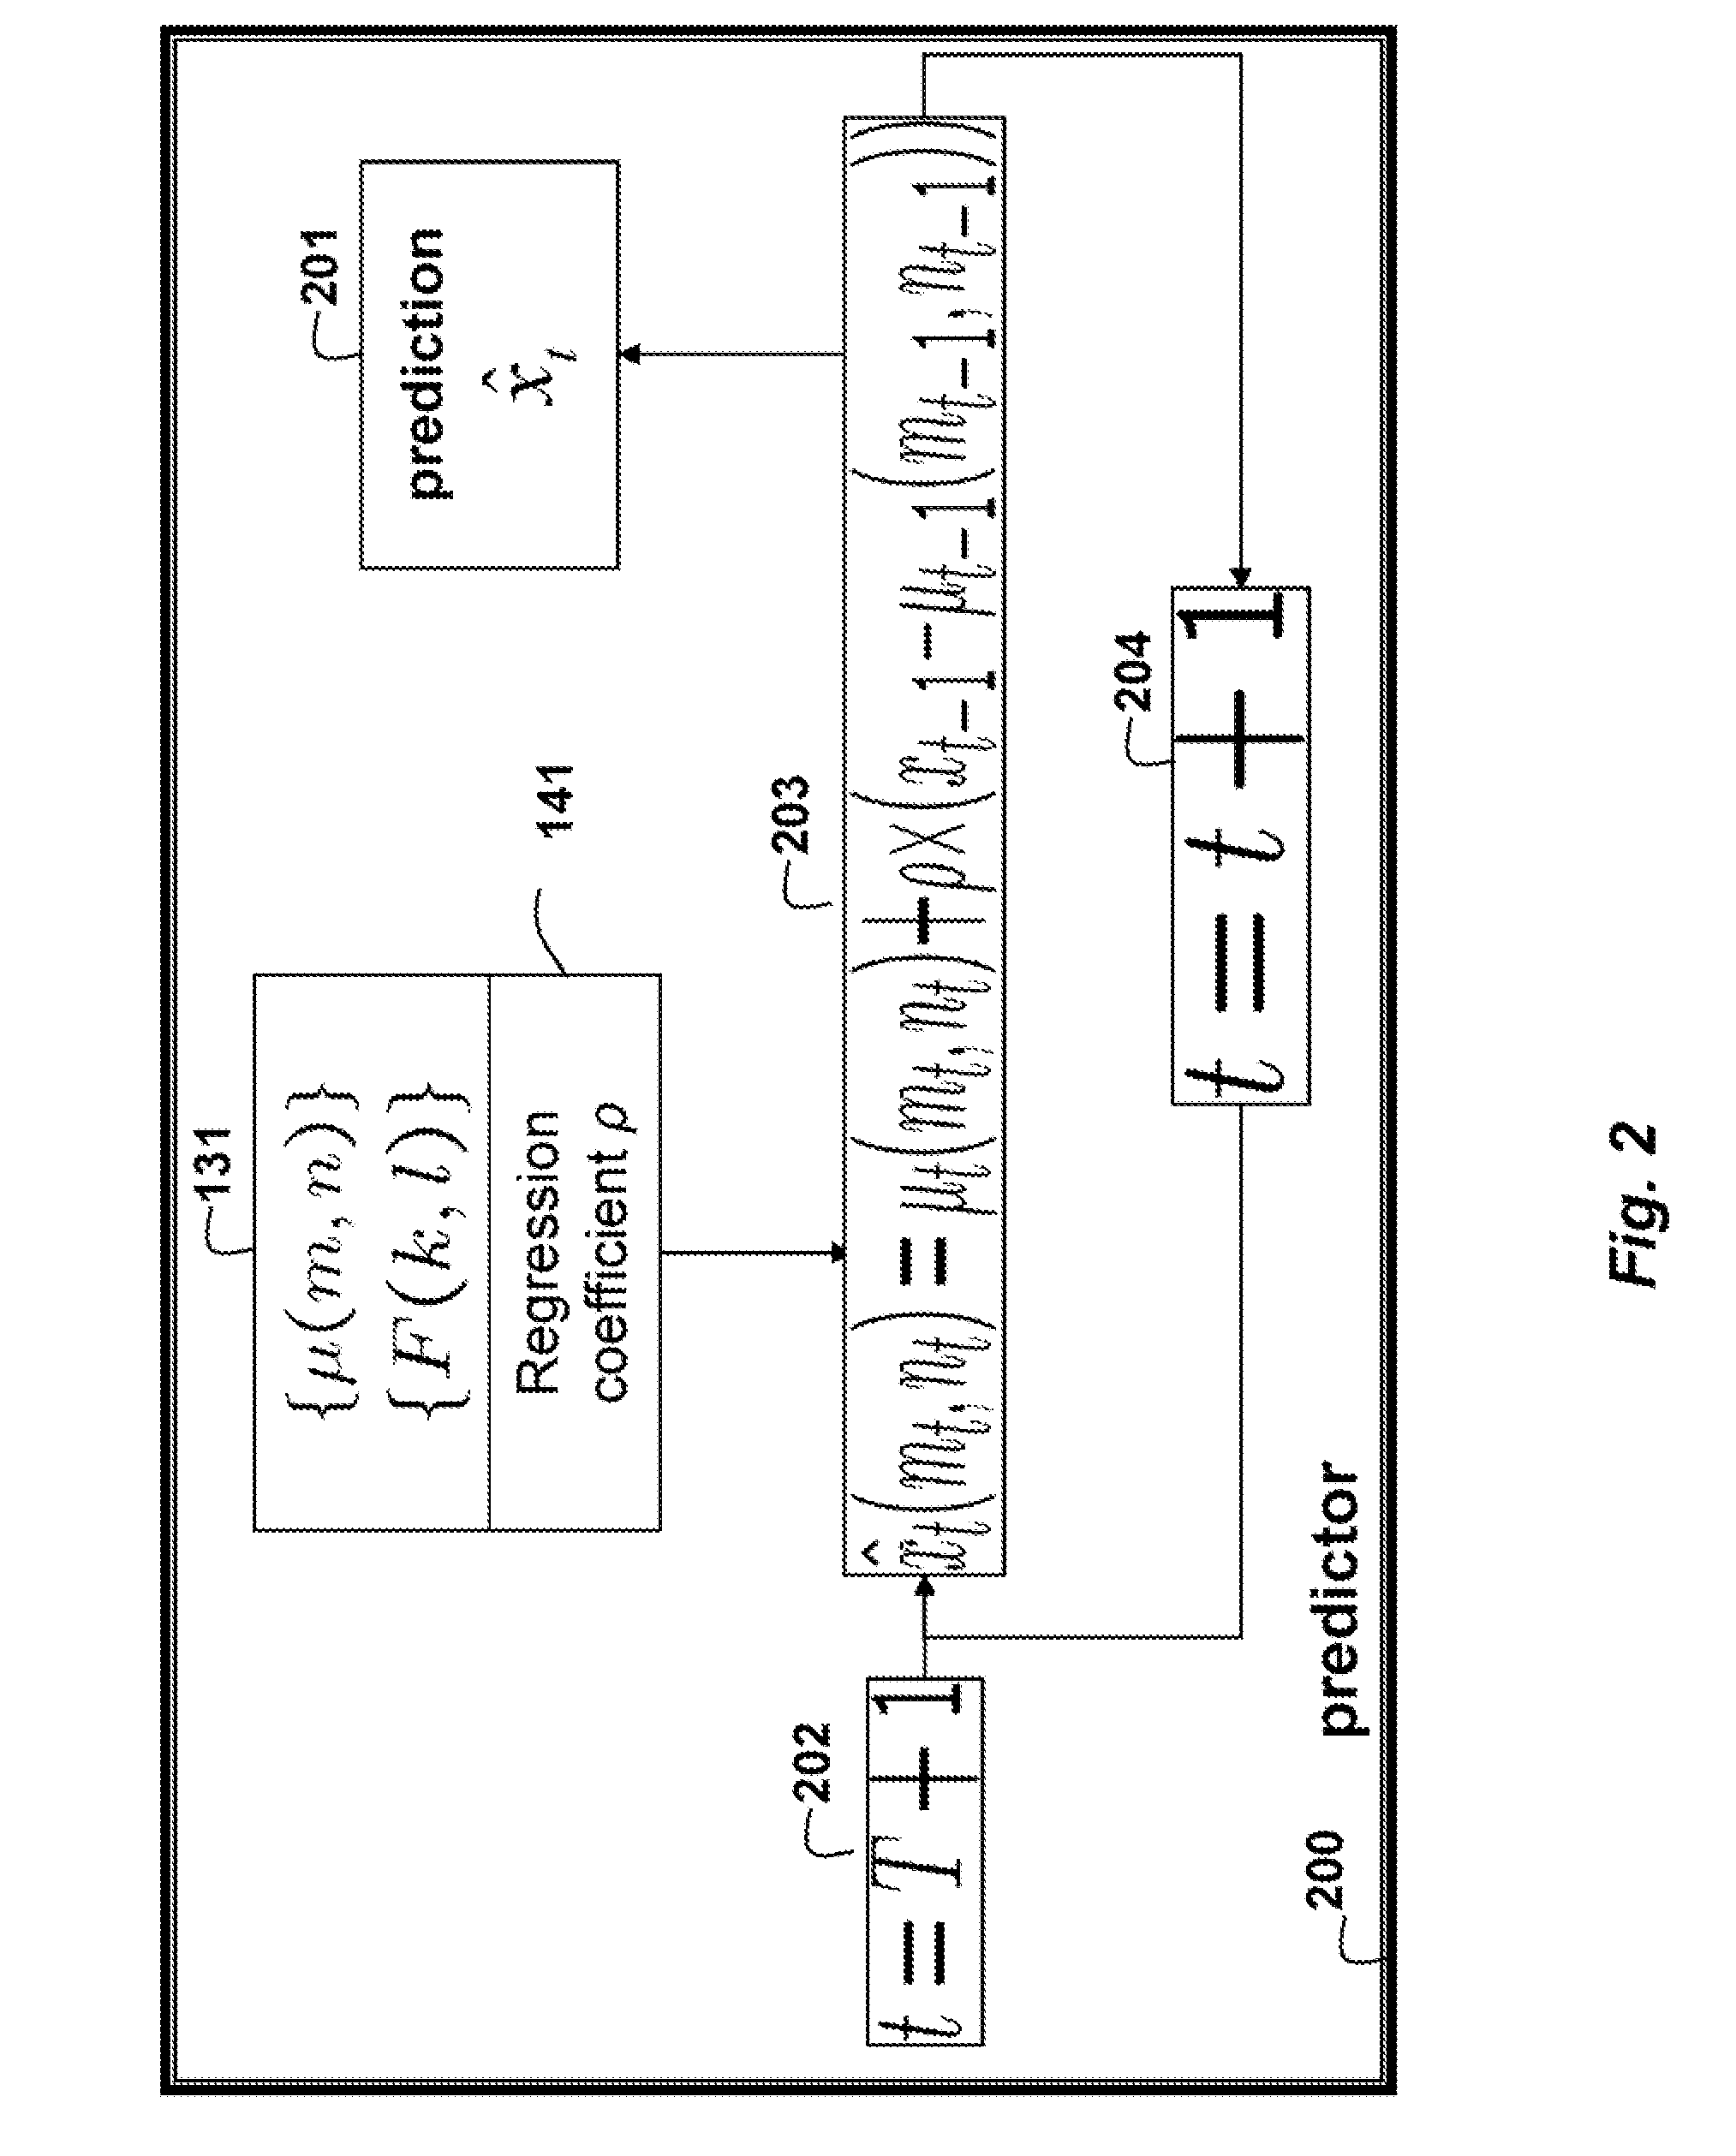 Method for Predicting Outputs of Photovoltaic Devices Based on Two-Dimensional Fourier Analysis and Seasonal Auto-Regression